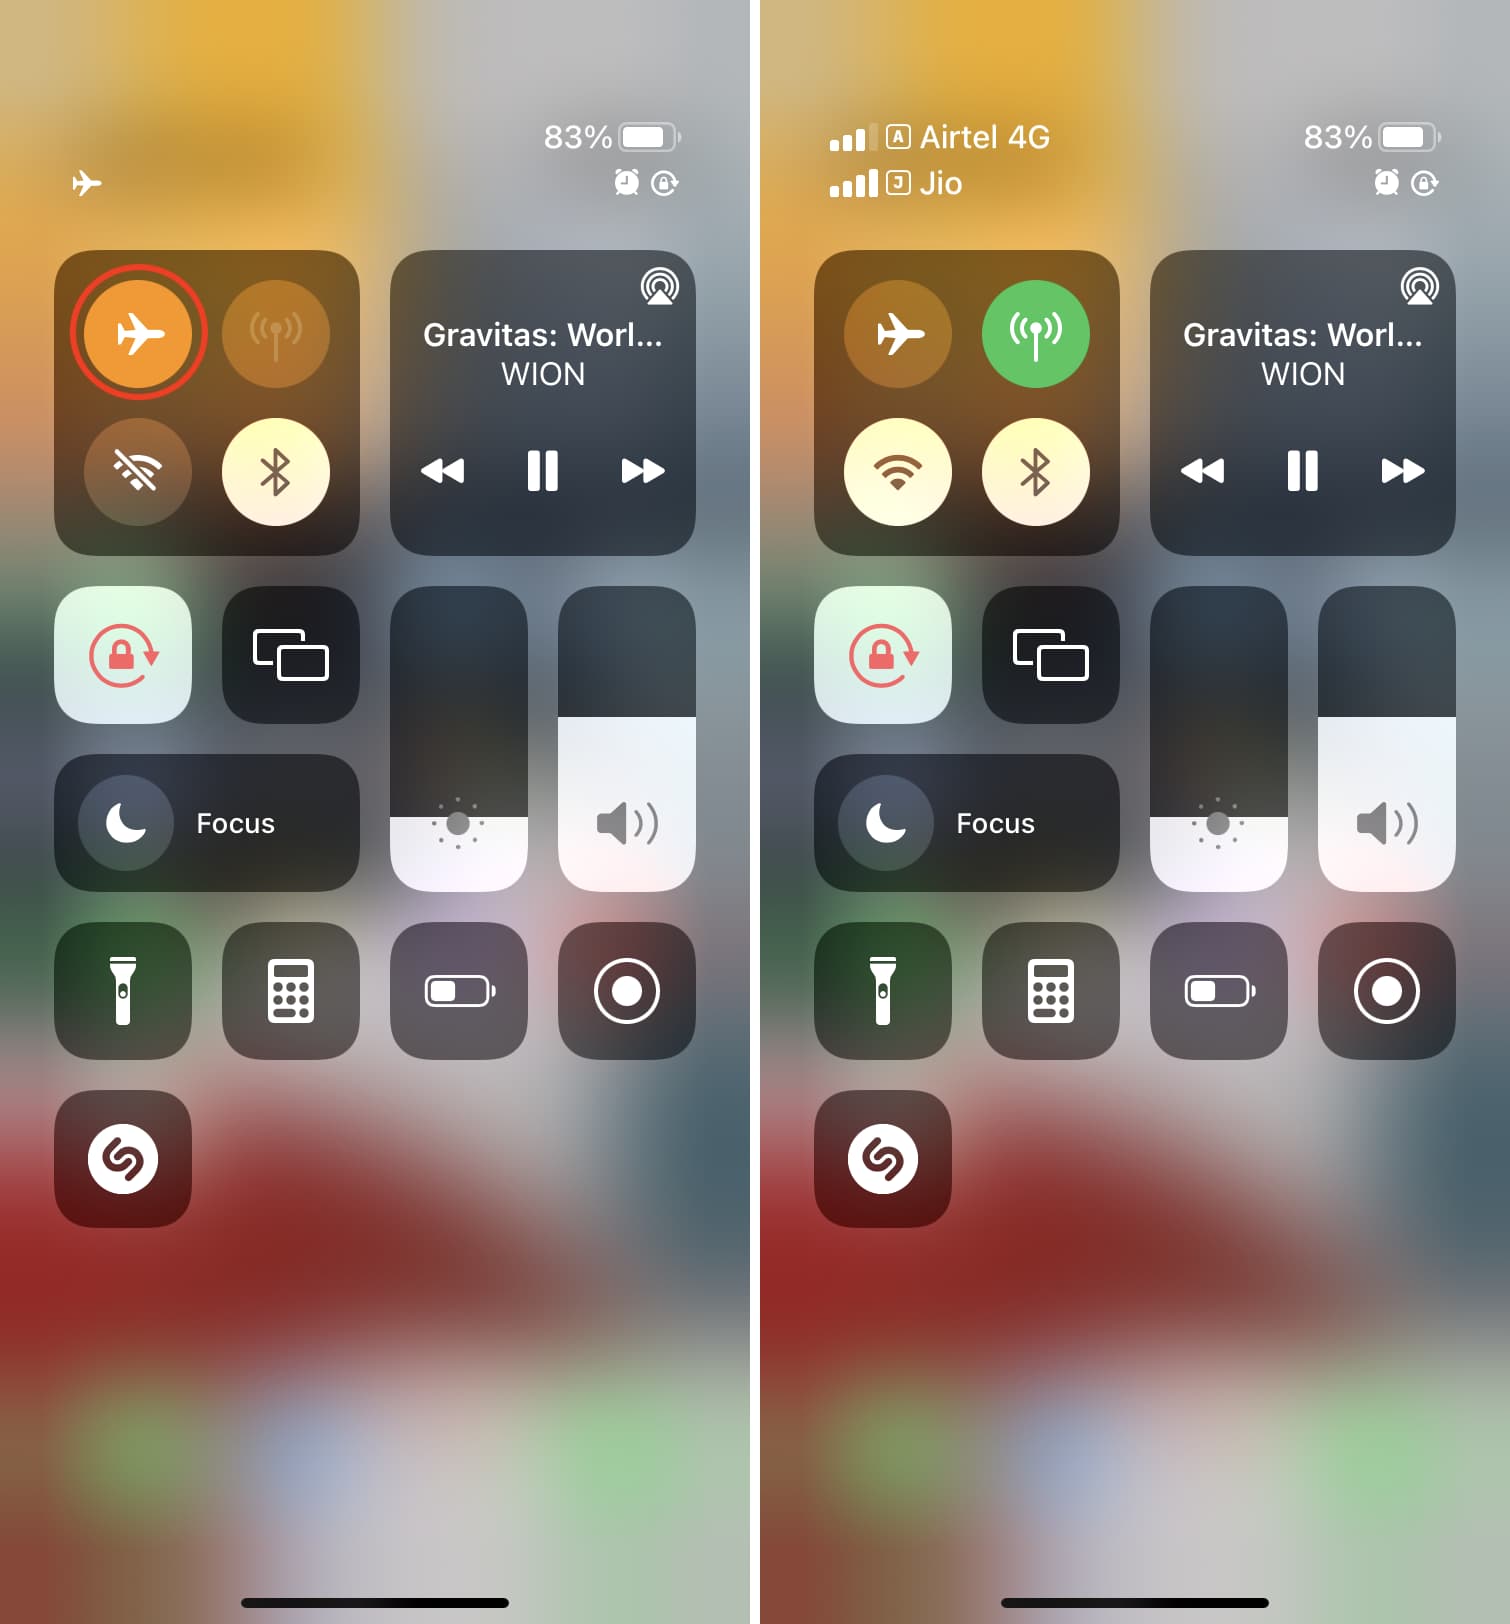 Toggle Airplane mode on and off on iPhone to increase cellular data speed